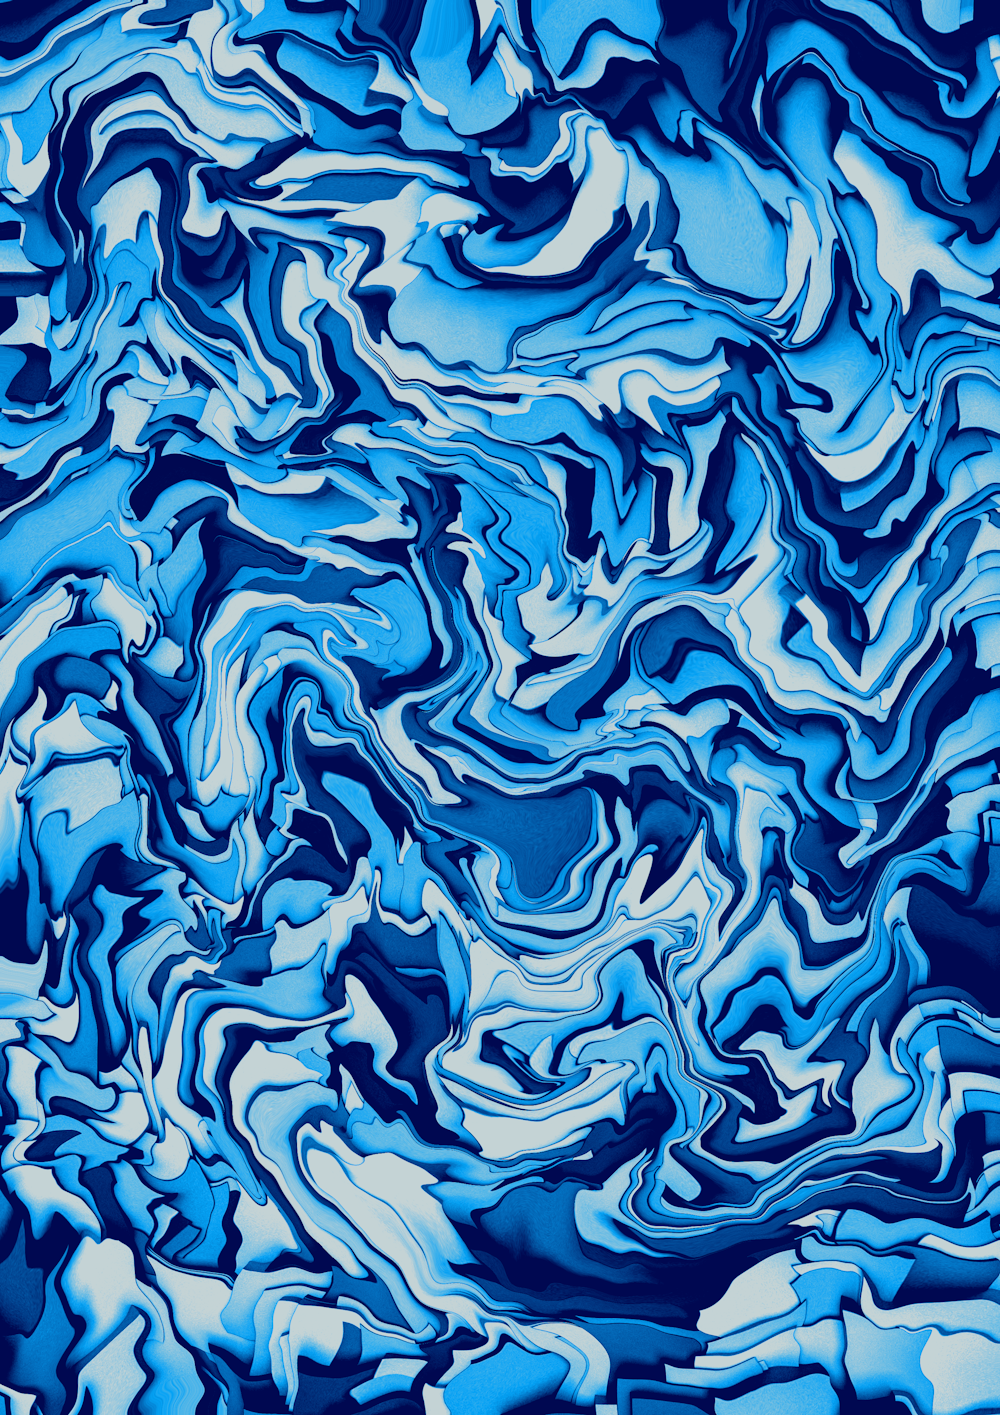 a blue and white abstract background with a wavy design